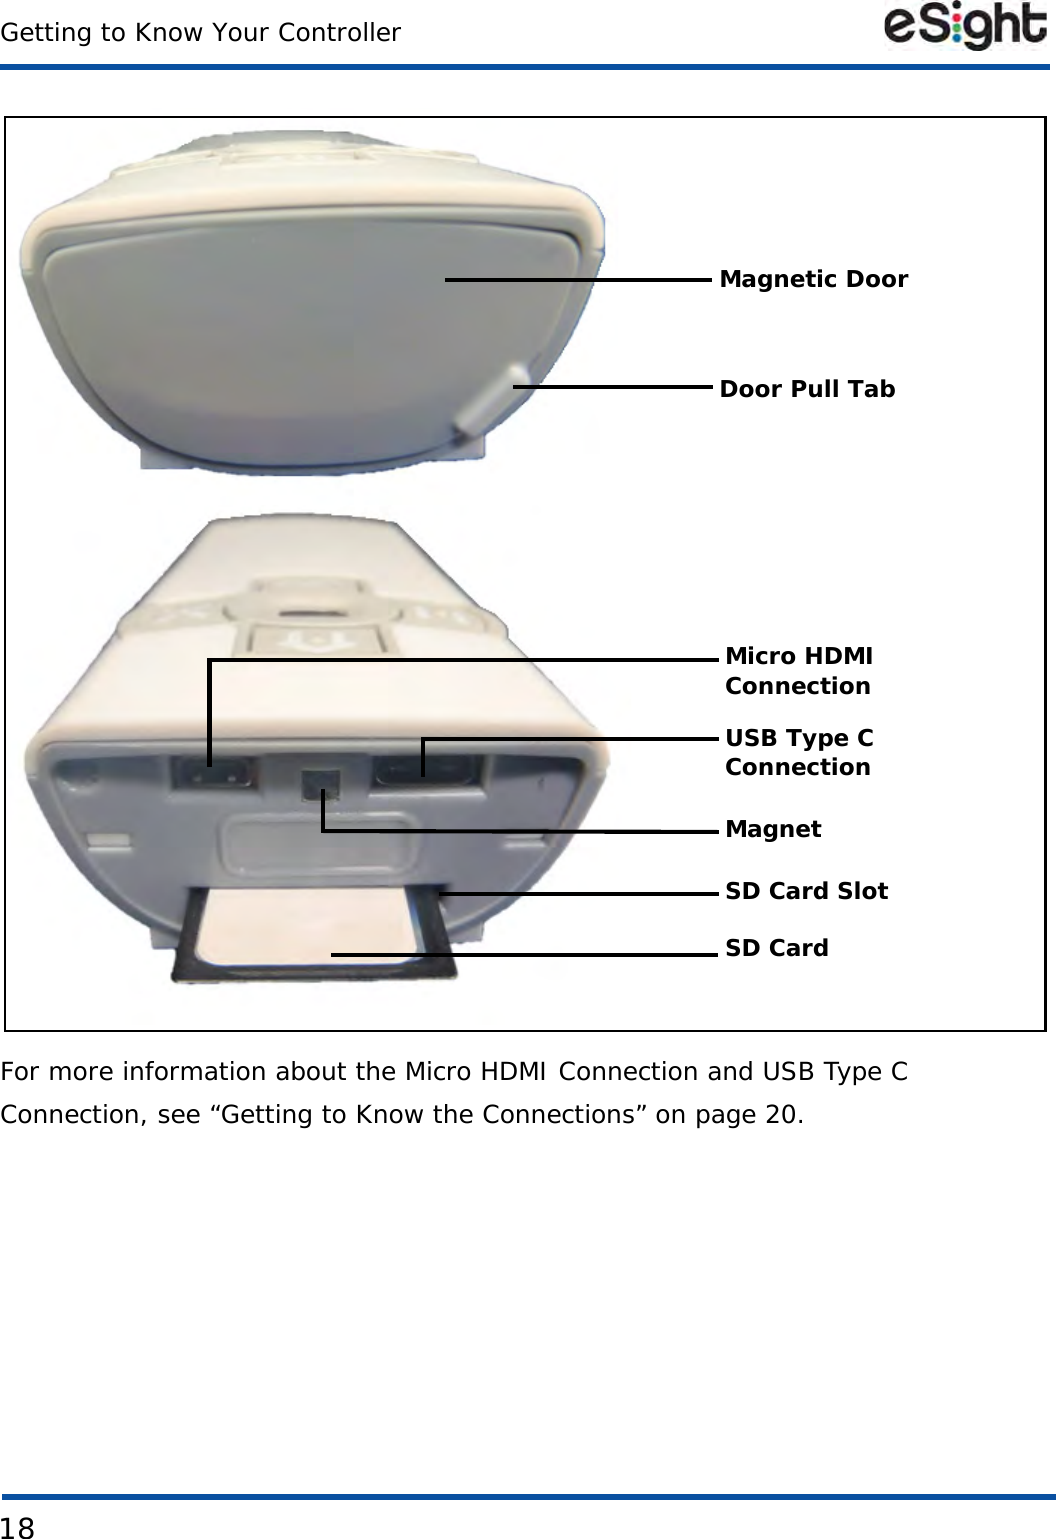 18Getting to Know Your ControllerFor more information about the Micro HDMI Connection and USB Type C Connection, see “Getting to Know the Connections” on page 20.Magnetic DoorDoor Pull TabSD CardMagnetSD Card SlotUSB Type CConnectionMicro HDMIConnection